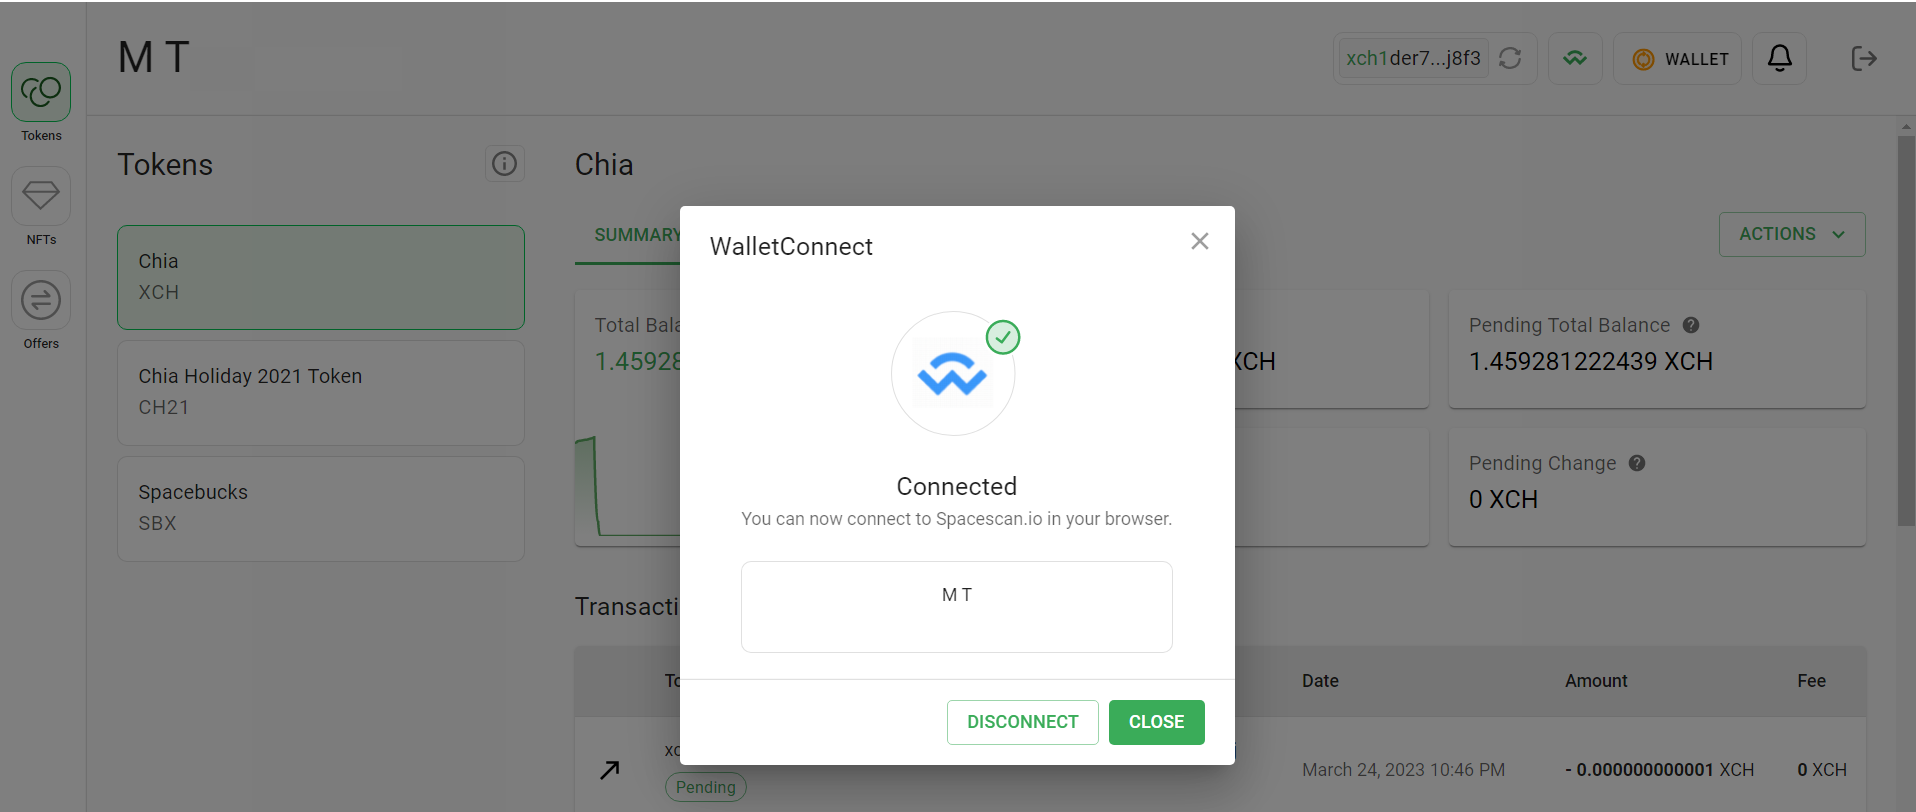 Chia wallet - wallet connect 4